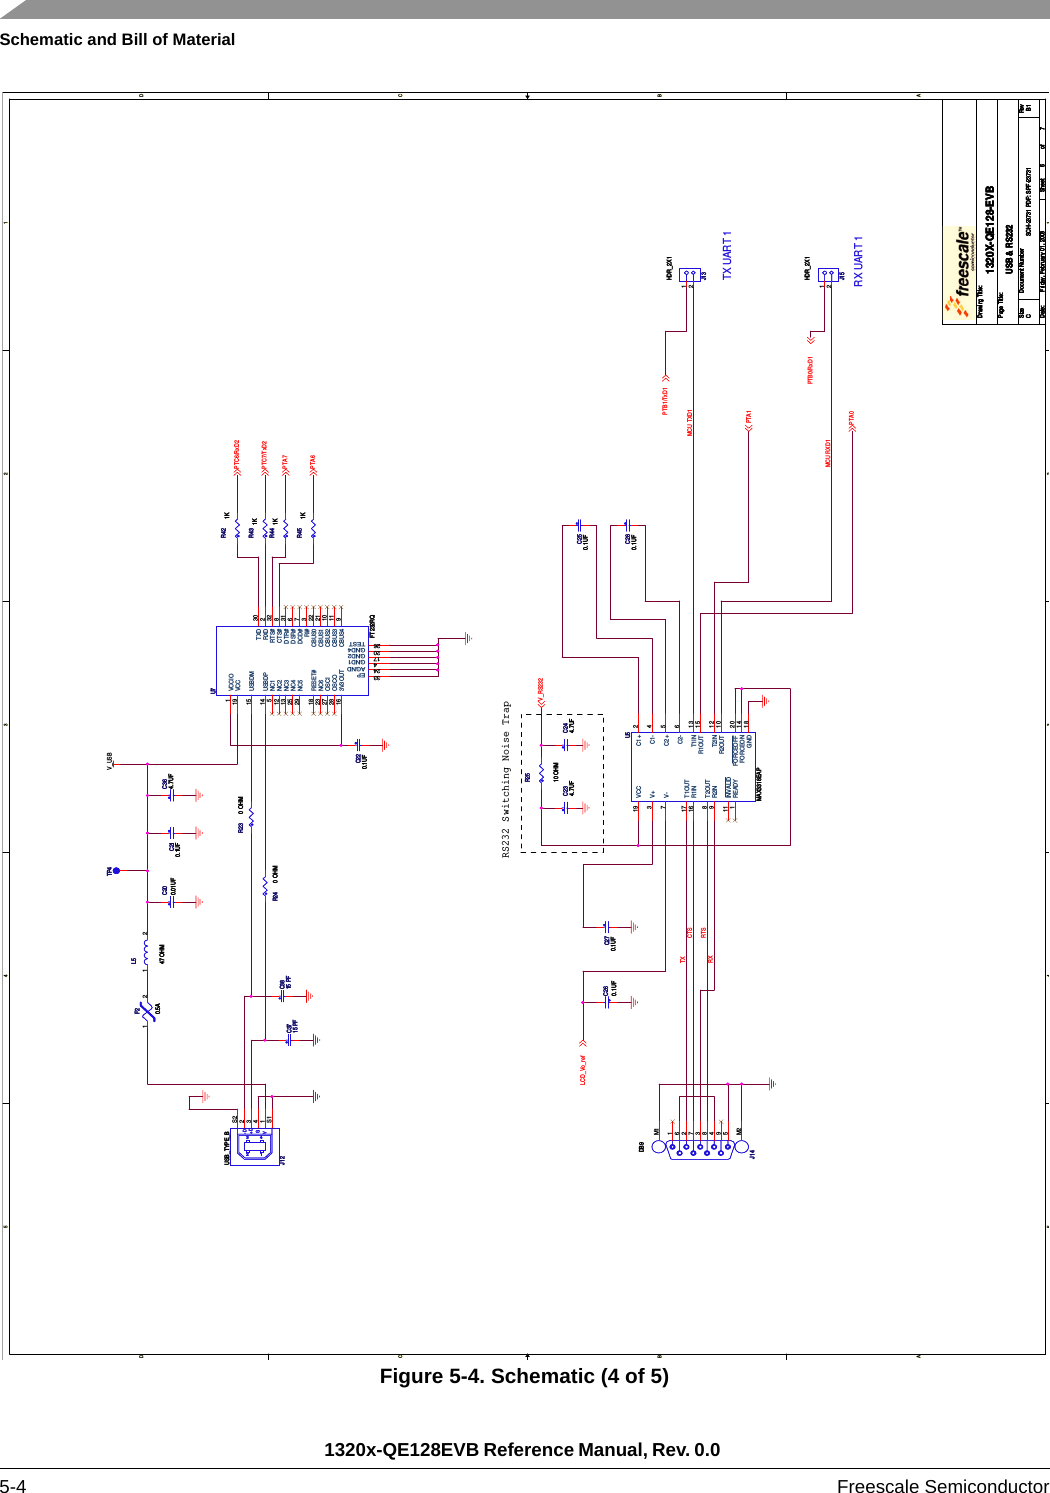 Schematic and Bill of Material1320x-QE128EVB Reference Manual, Rev. 0.0 5-4 Freescale SemiconductorFigure 5-4. Schematic (4 of 5)5544332211D DC CB BA AMCU RXD1TXCTSRTSRXMCU TXD1V_USBPTC6/RxD2PTC7/TxD2PTA7PTA6LCD_Vo_refV_RS232PTB1/TxD1PTB0/RxD1PTA0PTA1Drawing Title:Size Document Number RevDate: Sheet ofPage Title:SCH-23731 PDF: SPF-23731 B11320X-QE128-EVBCFriday, February 01, 2008USB &amp; RS23267Drawing Title:Size Document Number RevDate: Sheet ofPage Title:SCH-23731 PDF: SPF-23731 B11320X-QE128-EVBCFriday, February 01, 2008USB &amp; RS23267Drawing Title:Size Document Number RevDate: Sheet ofPage Title:SCH-23731 PDF: SPF-23731 B11320X-QE128-EVBCFriday, February 01, 2008USB &amp; RS23267TX UART 1RX UART 1RS232 Switching Noise TrapU5MAX3318EAPU5MAX3318EAPC1+ 2V+3C1- 4C2+ 5C2- 6V-7T2OUT8R2IN9R2OUT 10T2IN 12T1IN 13R1OUT 15R1IN16FORCEON 14INVALID11READY1VCC19FORCEOFF 20T1OUT17GND 18C3715 PFC3715 PFR43 1KR43 1KR45 1KR45 1KC364.7UFC364.7UFC260.1UFC260.1UFC200.01UFC200.01UFC244.7UFC244.7UF1234+D-DGVJ12USB_TYPE_B1234+D-DGVJ12USB_TYPE_B1234S1S2J15HDR_2X1J15HDR_2X112R23 0 OHMR23 0 OHML547 OHML547 OHM1 2R42 1KR42 1KR44 1KR44 1KR2510 OHMR2510 OHMJ14DB9J14DB9594837261M2M1J13HDR_2X1J13HDR_2X112C210.1UFC210.1UFF20.5AF20.5A1 2U7FT232RQU7FT232RQGND14AGND24RI# 3DCD# 7DSR# 6DTR# 313V3OUT16VCCIO1OSCI27RESET#18NC623OSCO28CBUS4 9CBUS3 11CBUS1 21CBUS0 22CBUS2 10NC529 NC425 NC313 NC212 NC15USBDP14USBDM15VCC19GND420 GND217TEST26CTS# 8RTS# 32RXD 2TXD 30EP33TP4TP4C3815 PFC3815 PFC280.1UFC280.1UFC234.7UFC234.7UFC220.1UFC220.1UFC250.1UFC250.1UFR24 0 OHMR24 0 OHMC270.1UFC270.1UF